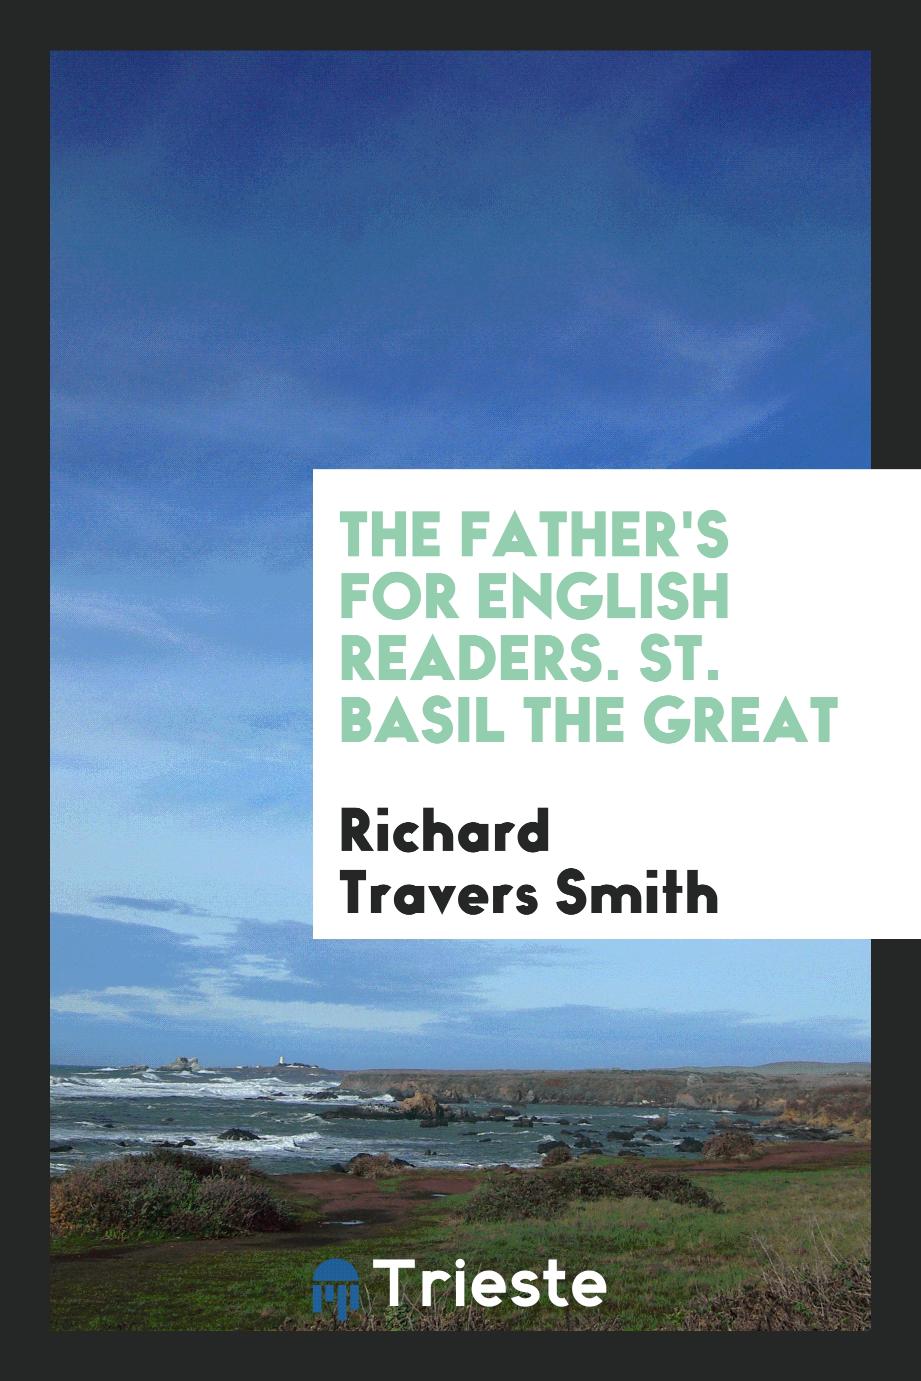 The Father's for English readers. St. Basil the Great